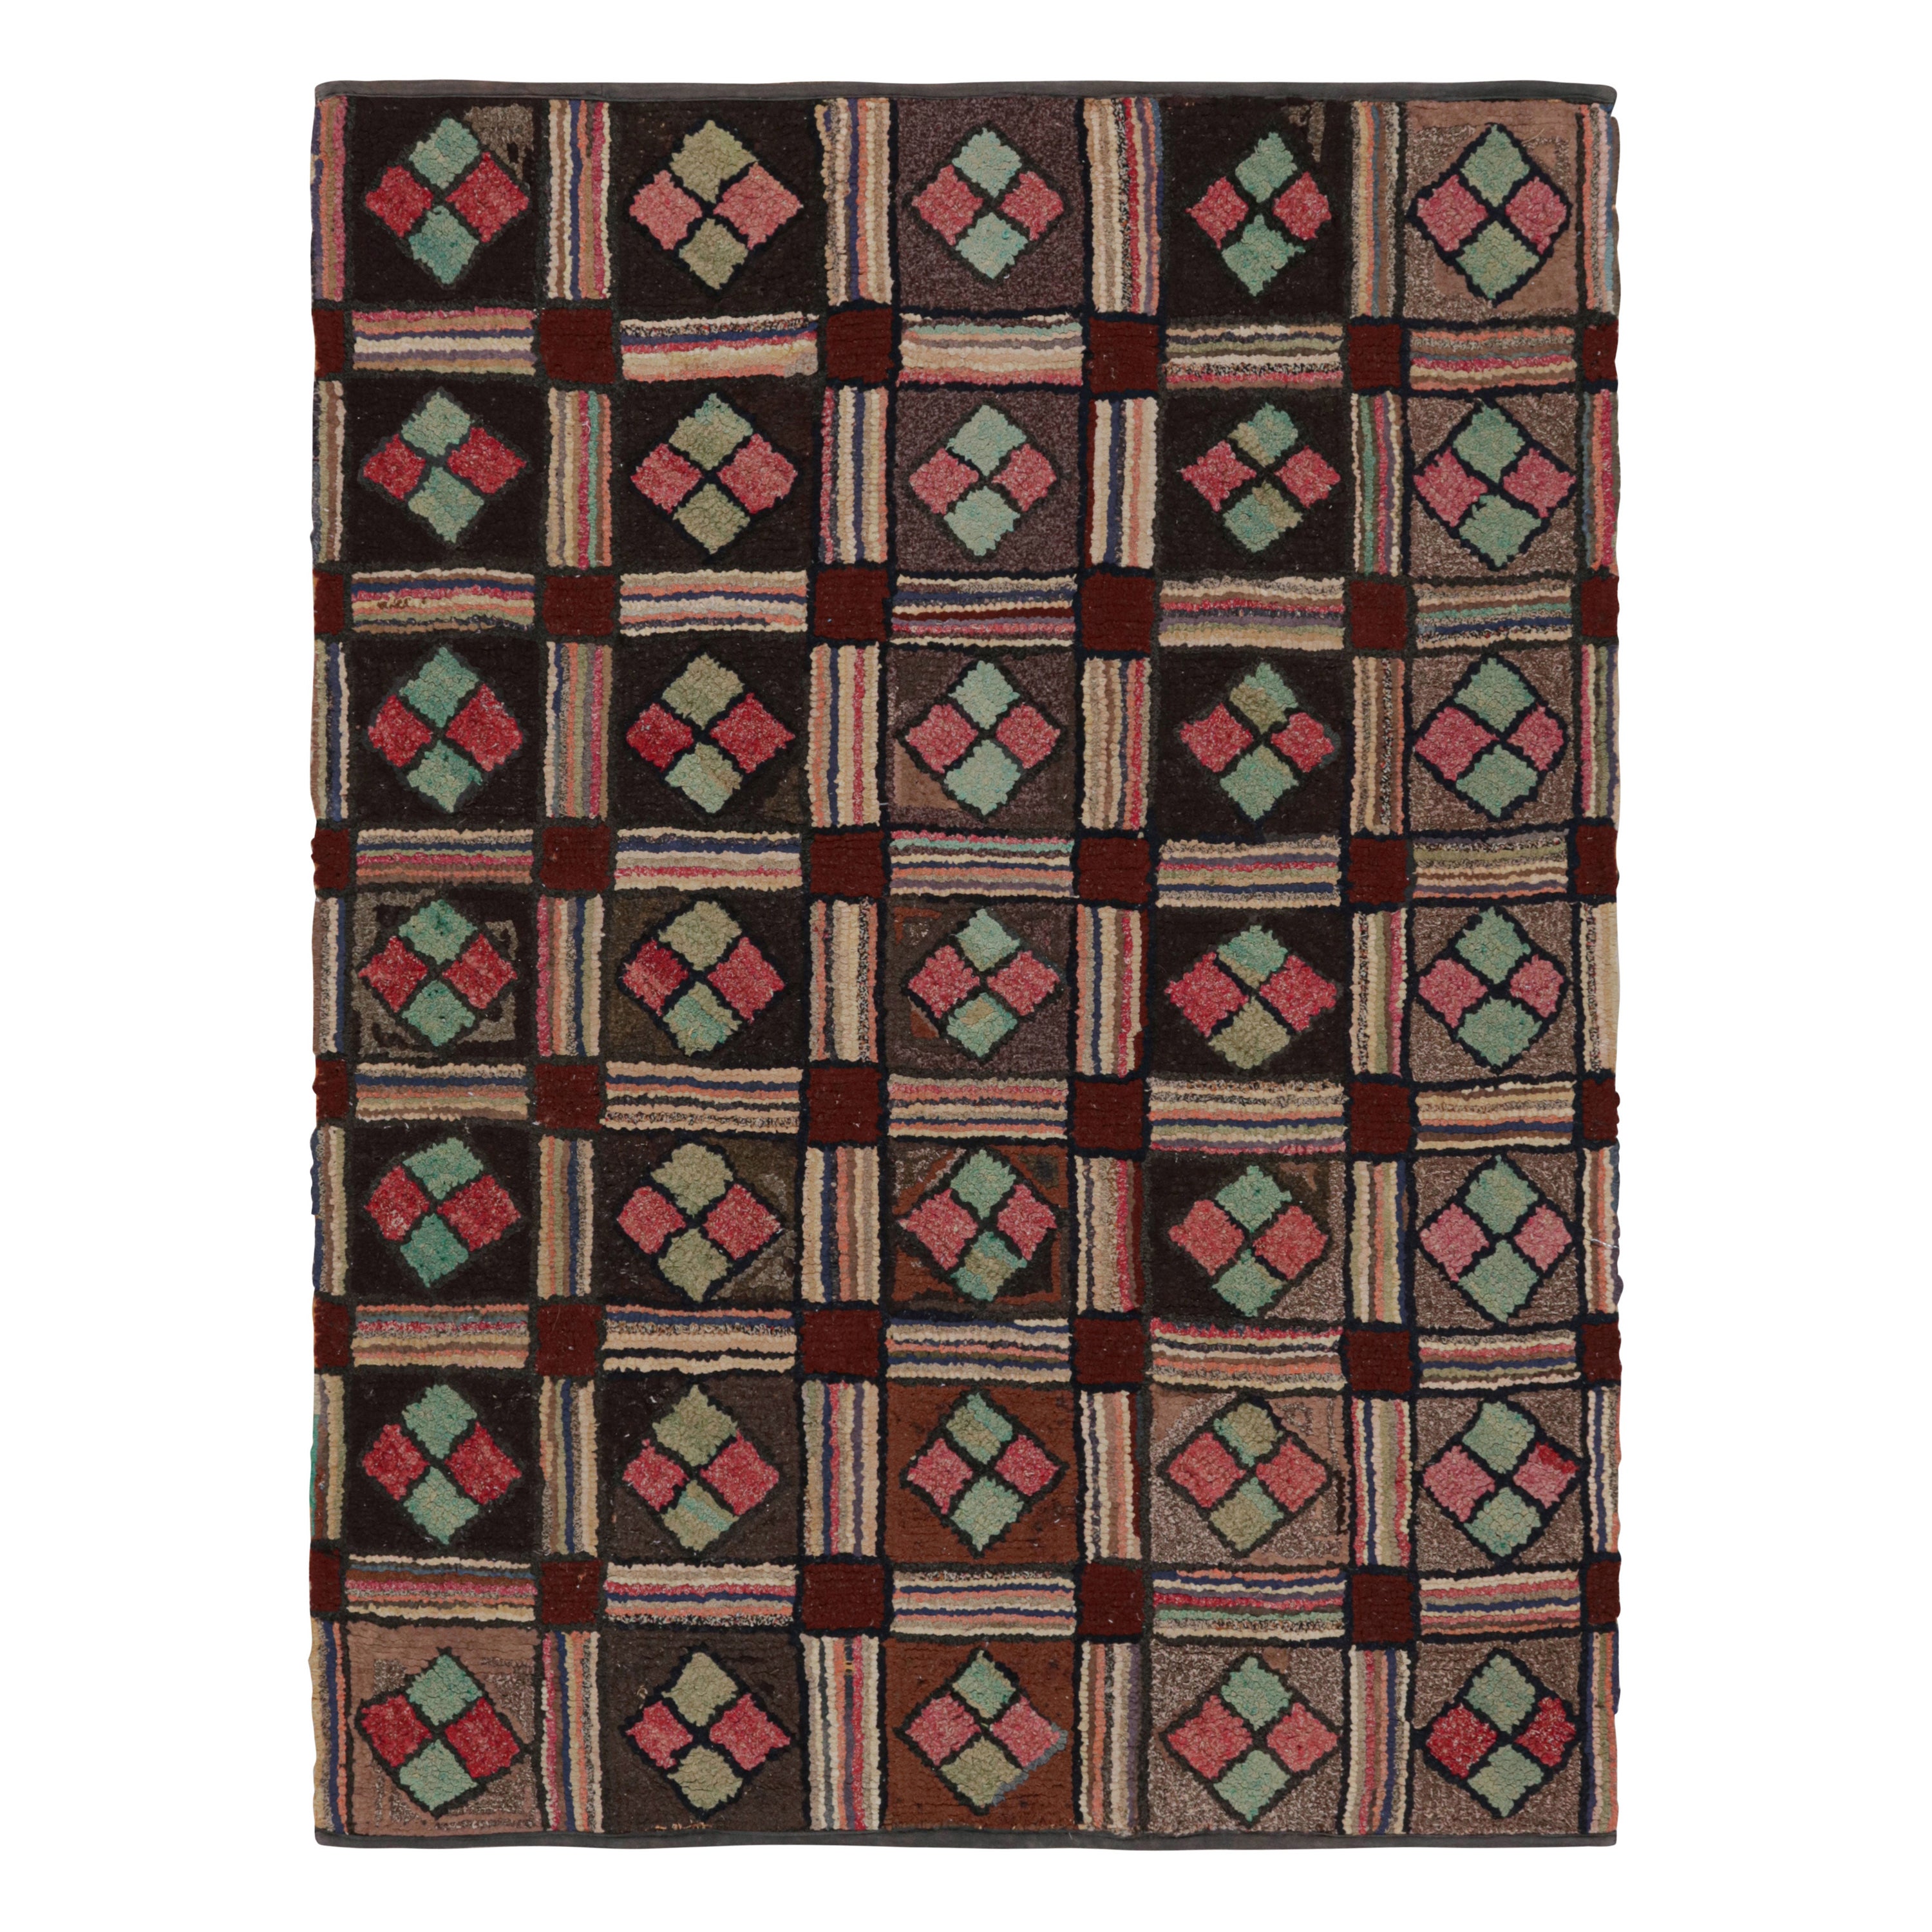 Antique Hooked Rug with Brown, Red and Blue Geometric Patterns, from Rug & Kilim For Sale